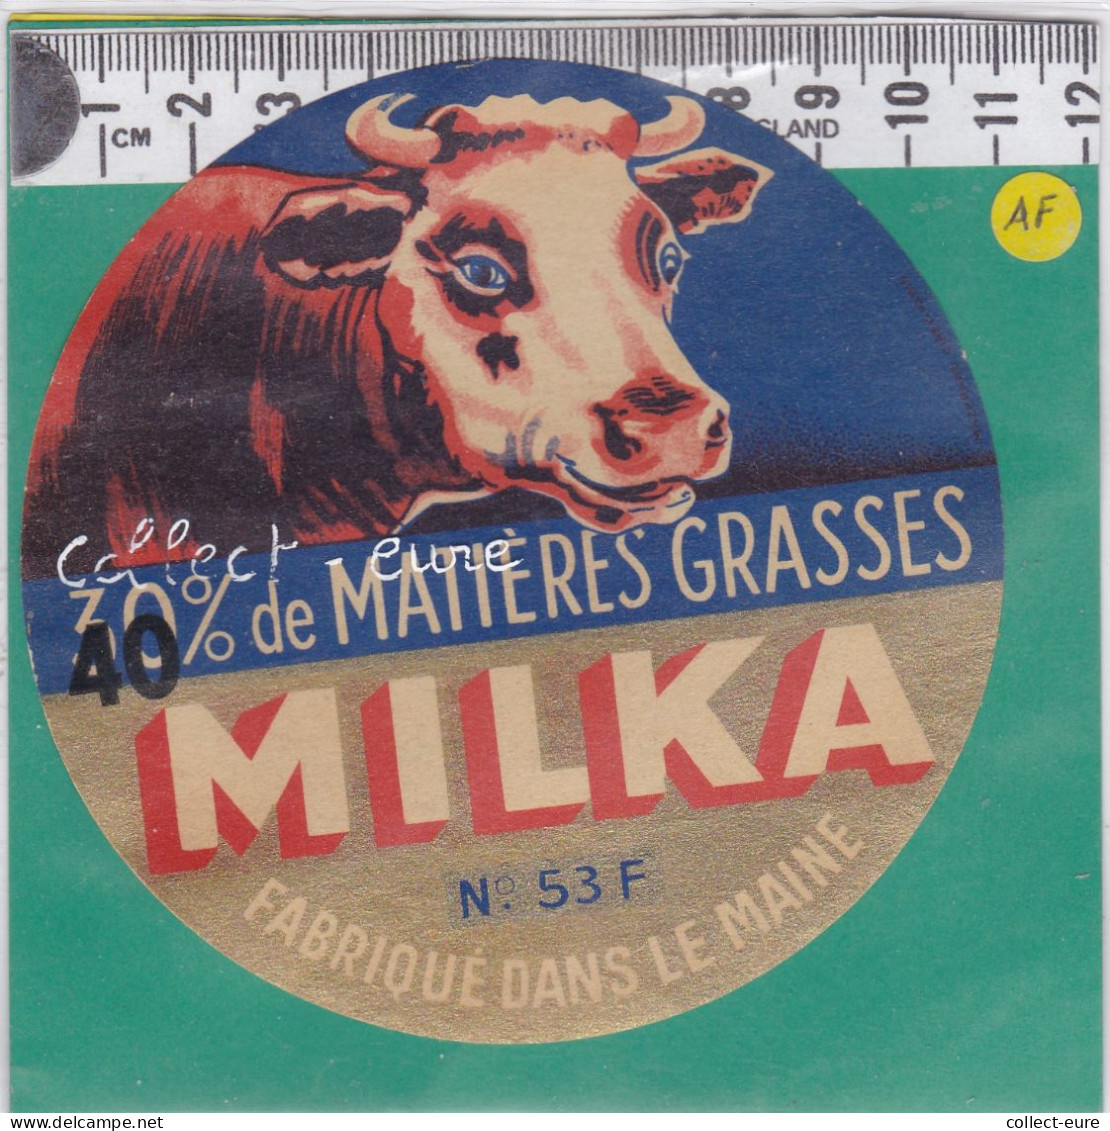 C1347 FROMAGE MILKA LAVAL MAYENNE 30% SURCHAGE 40 % - Quesos